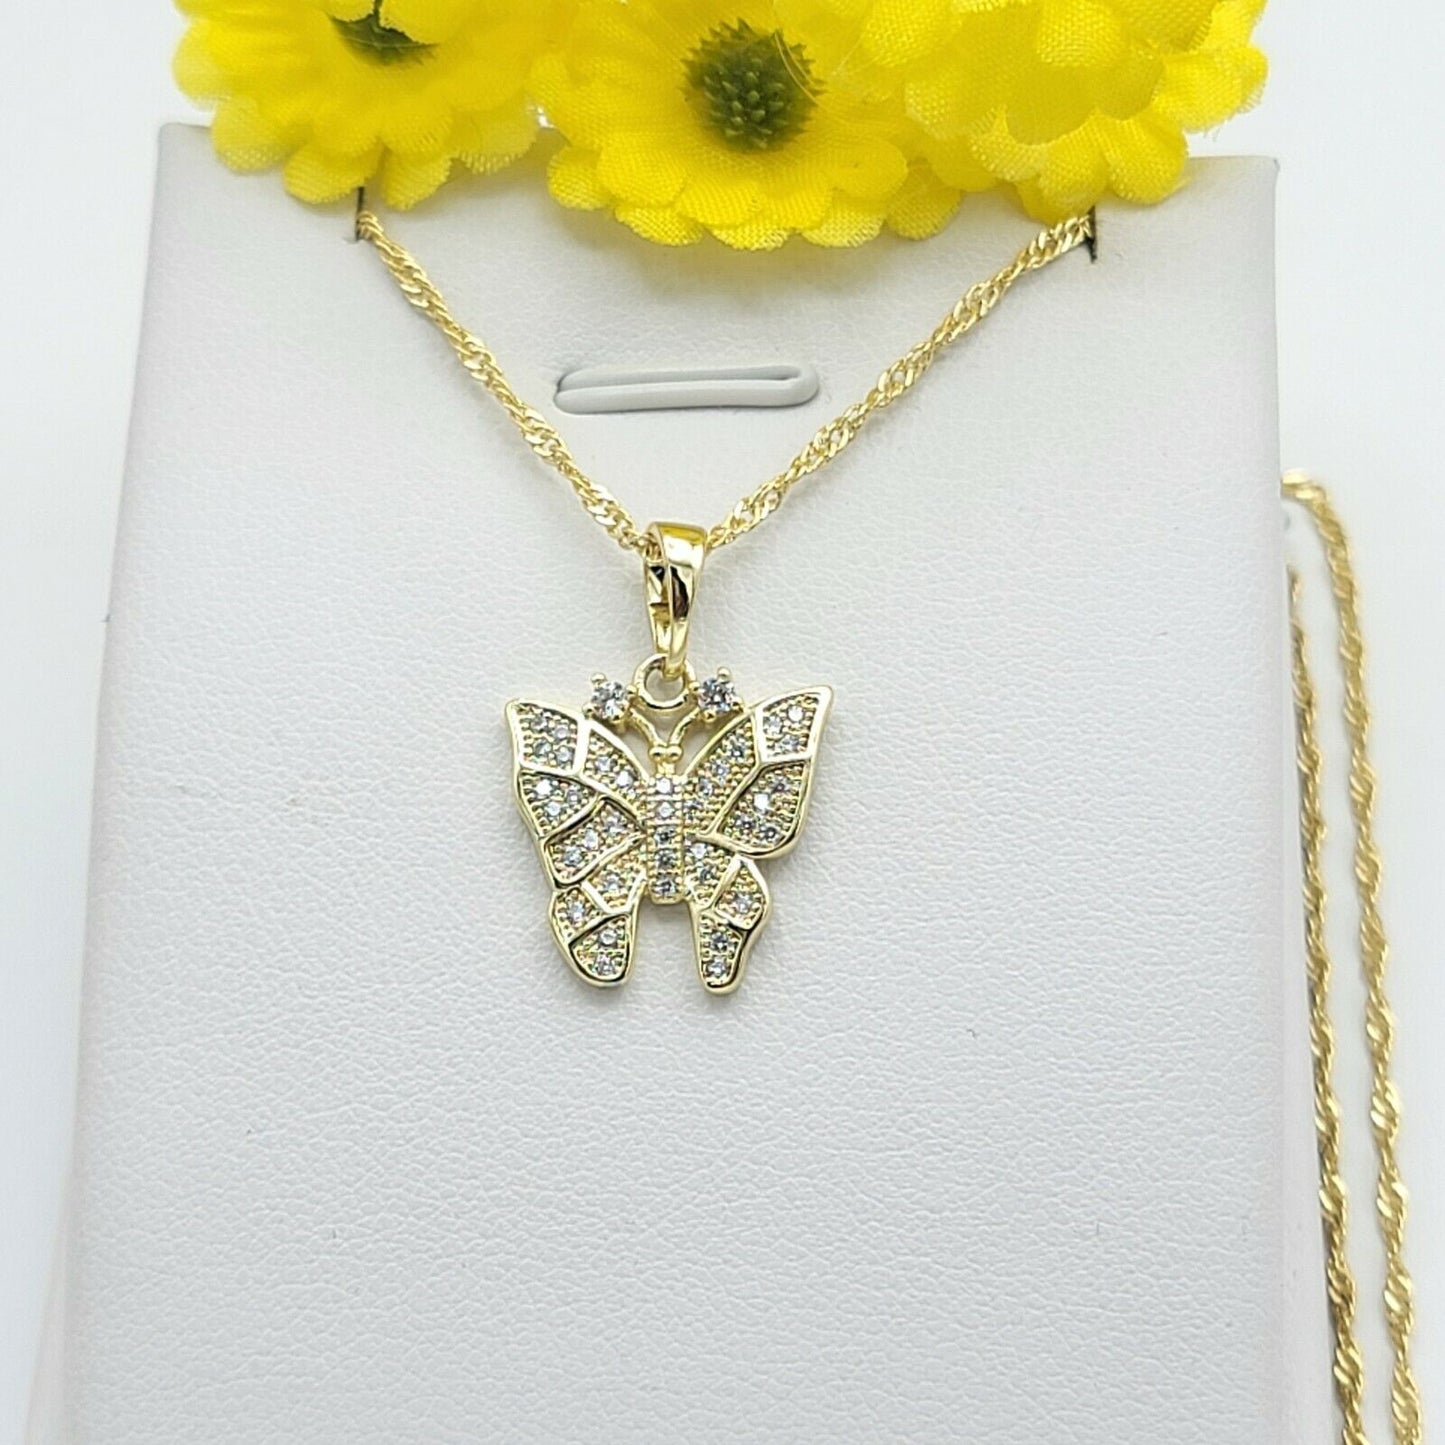 Necklaces - 14K Gold Plated. Small Butterfly Pendant & Chain.